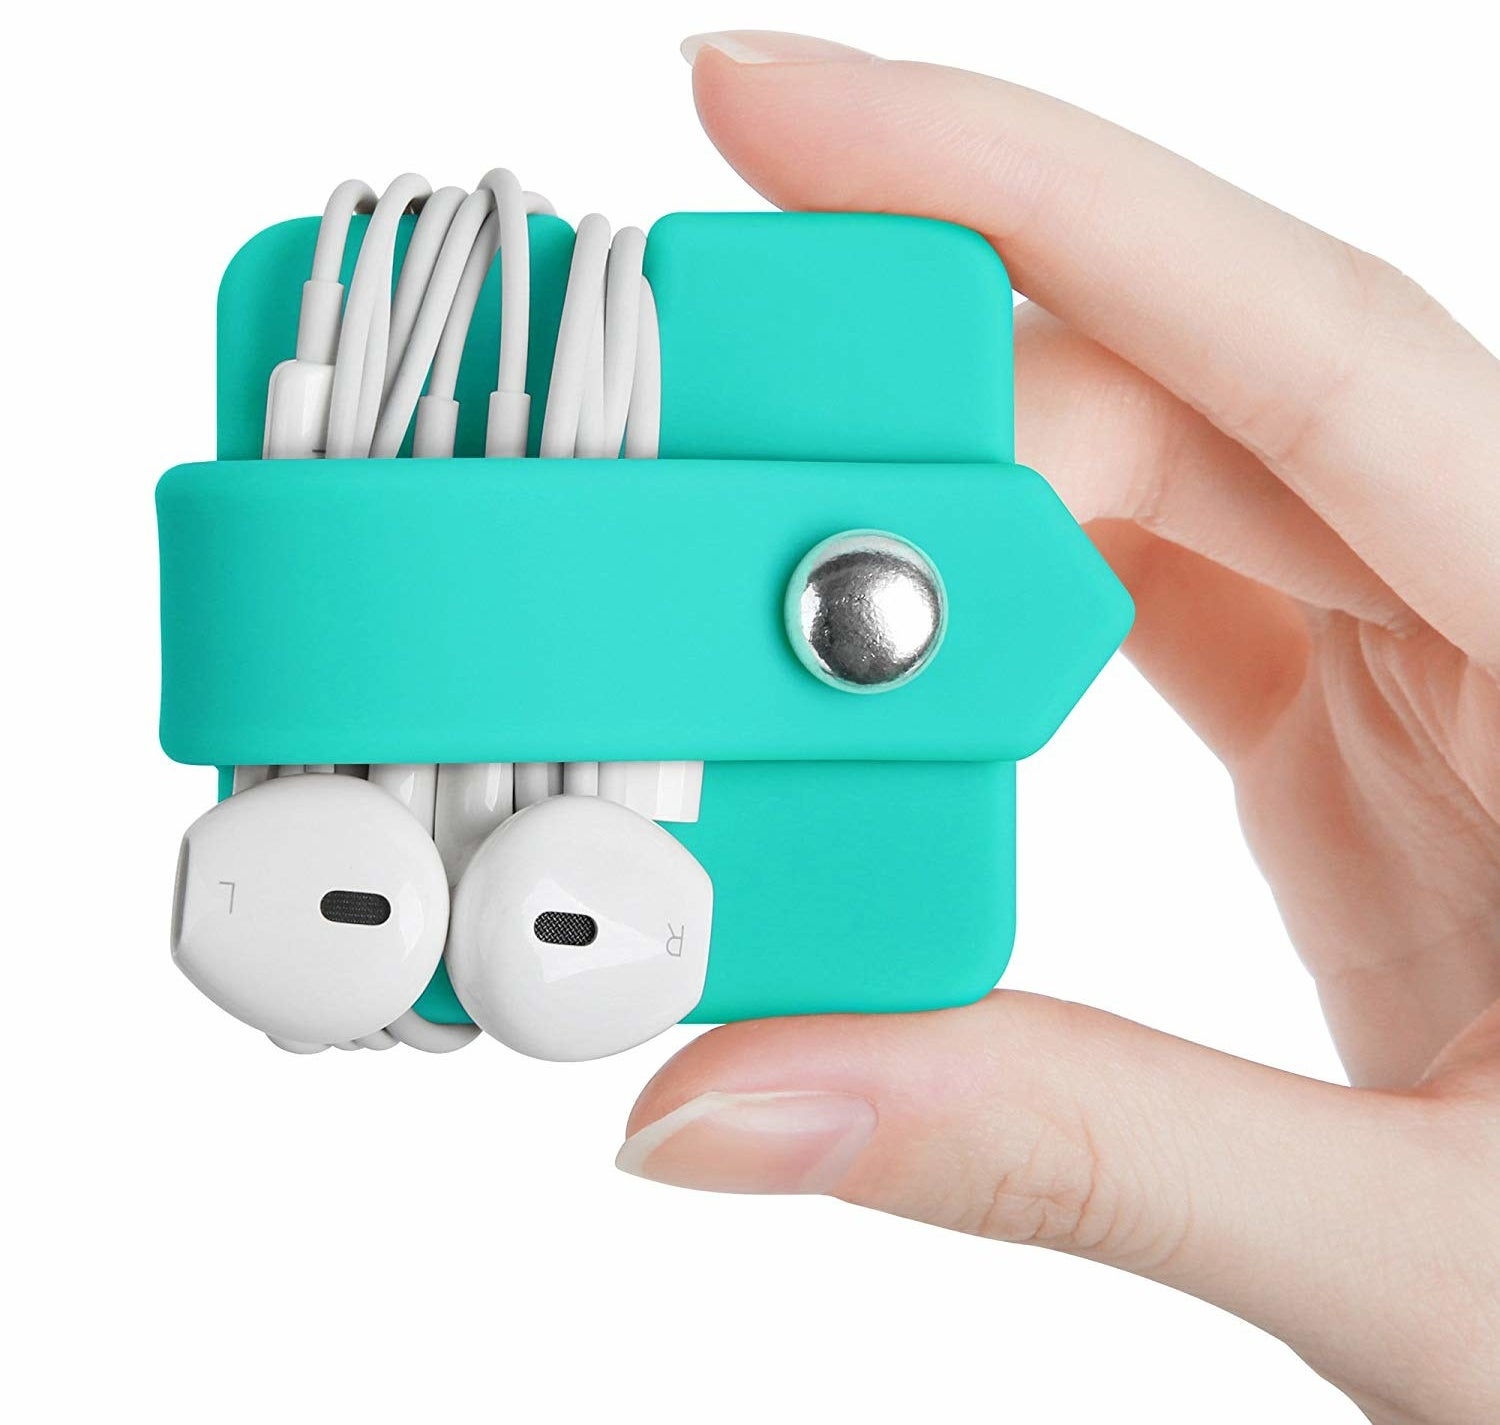 Model holding up the earbud organizer